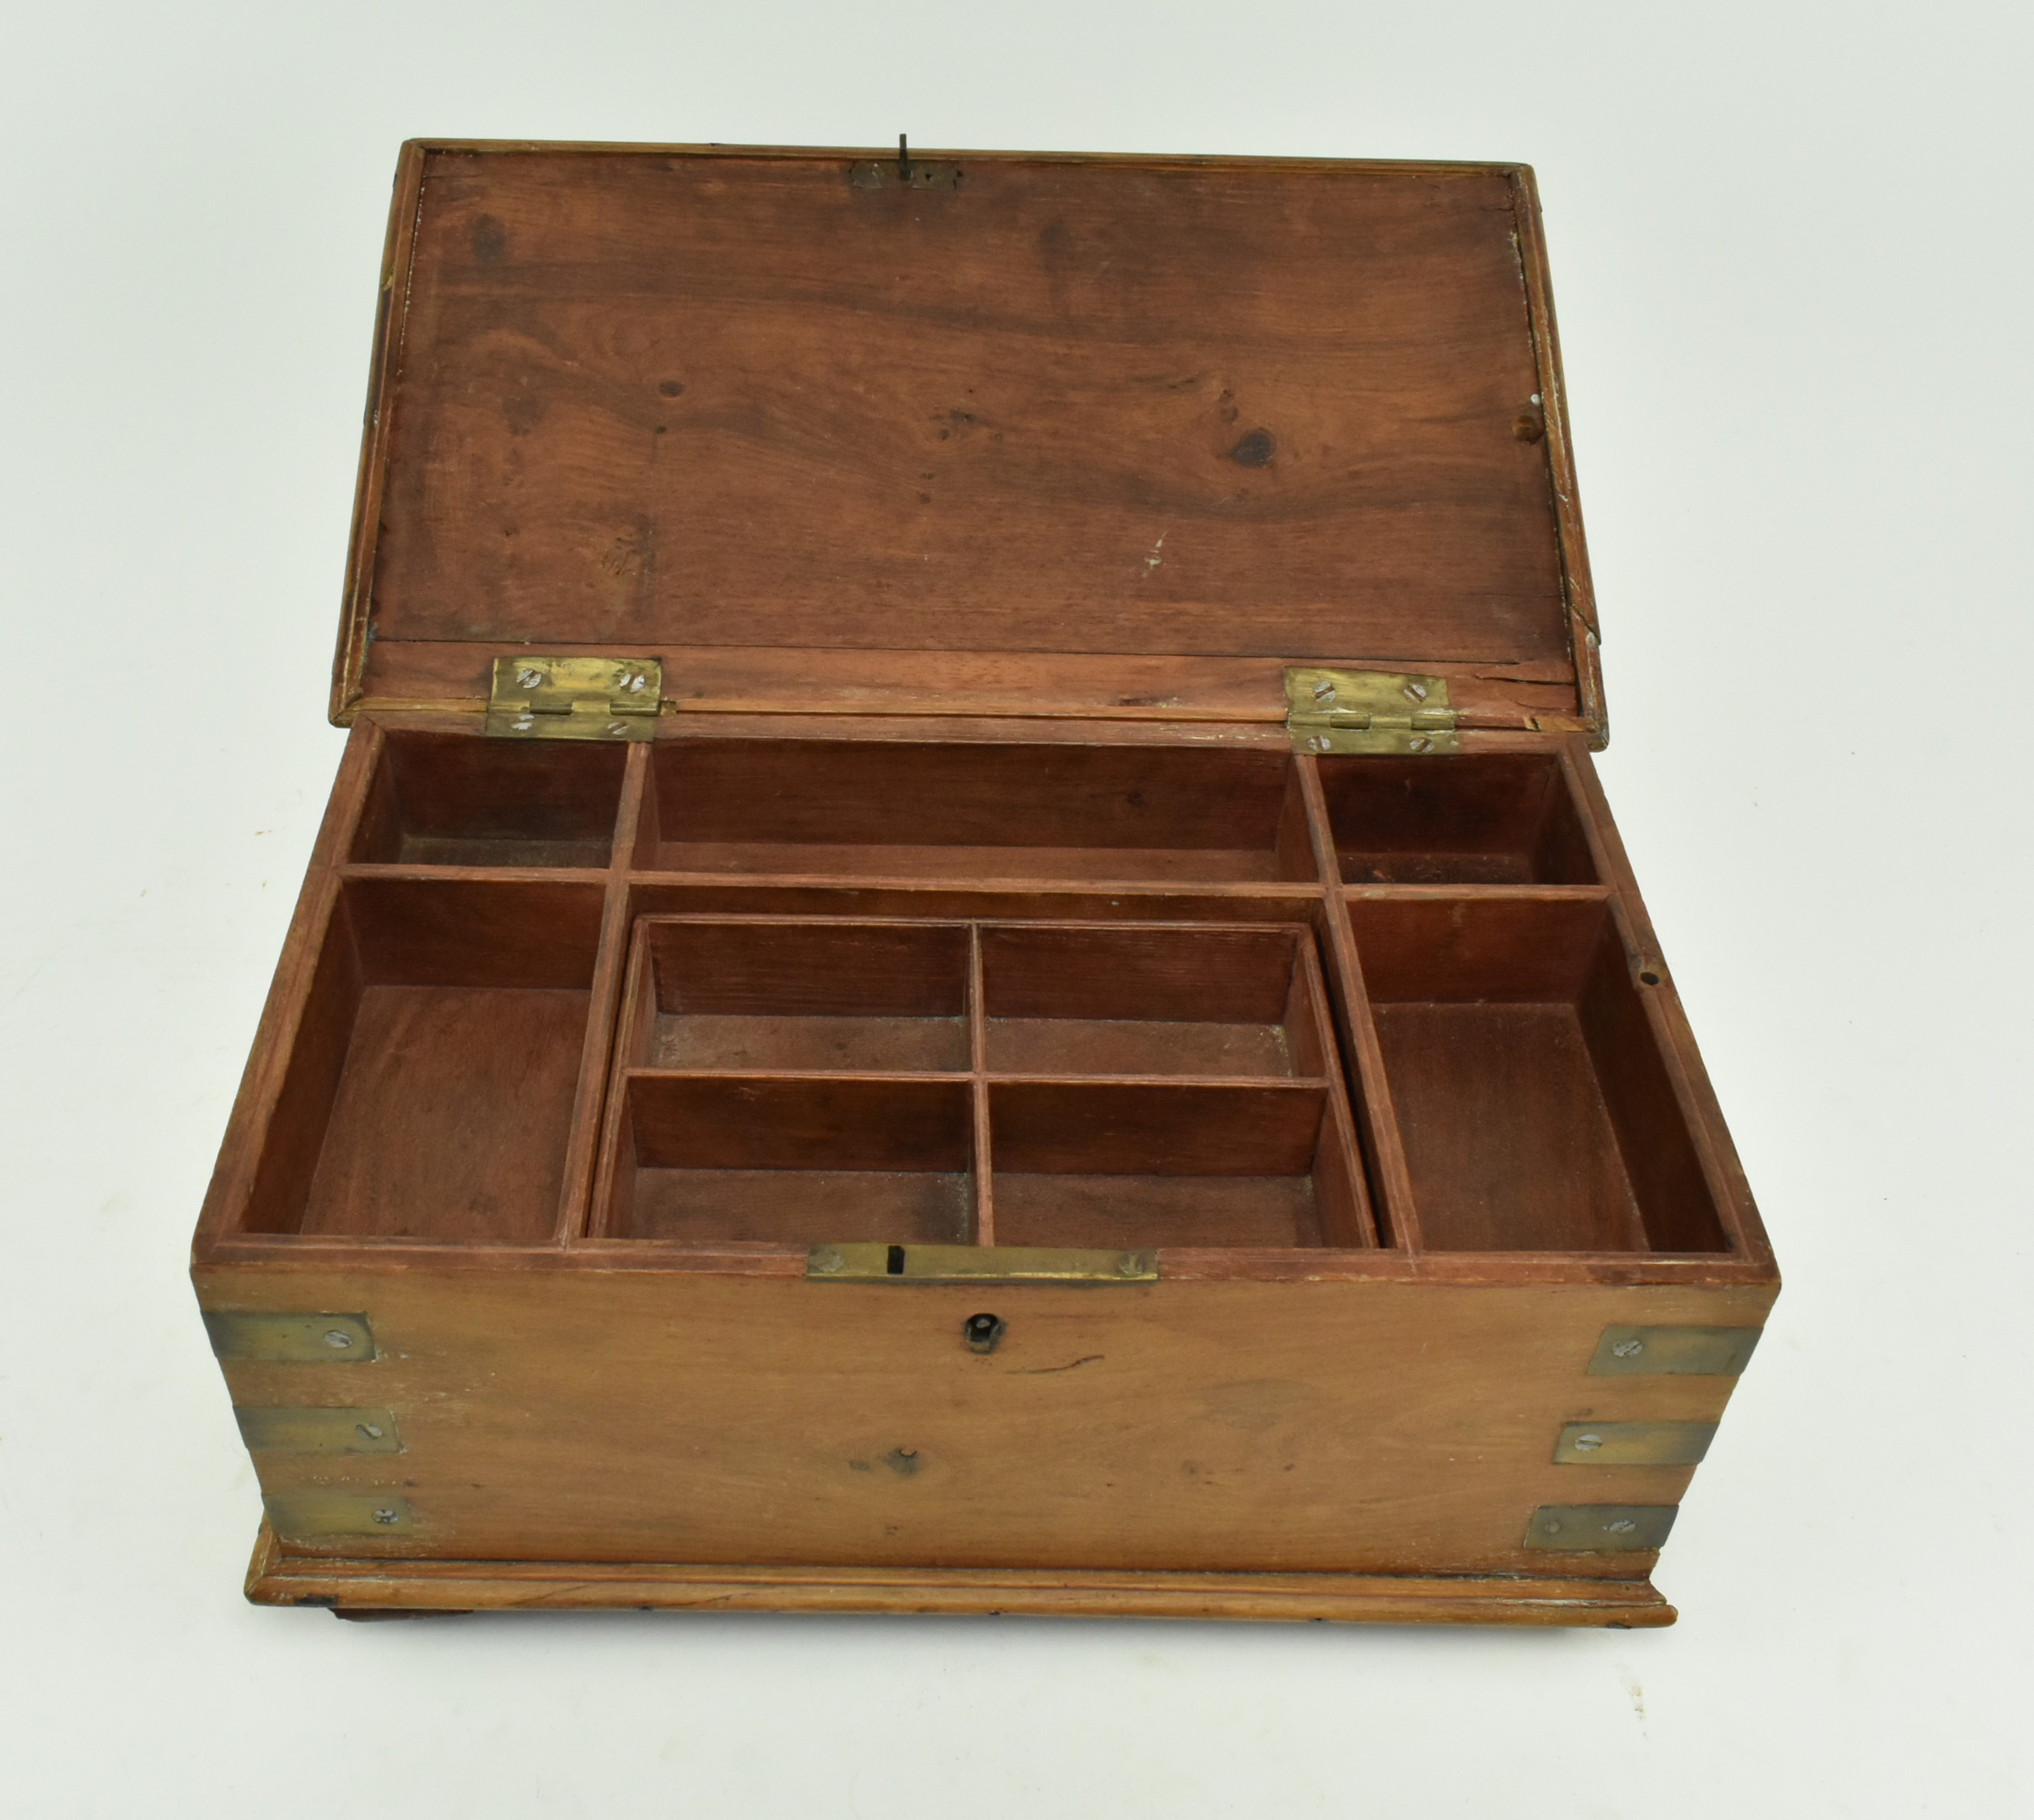 EARLY 20TH CENTURY ANGLO-INDIAN CAMPAIGN JEWELLERY BOX - Image 3 of 9